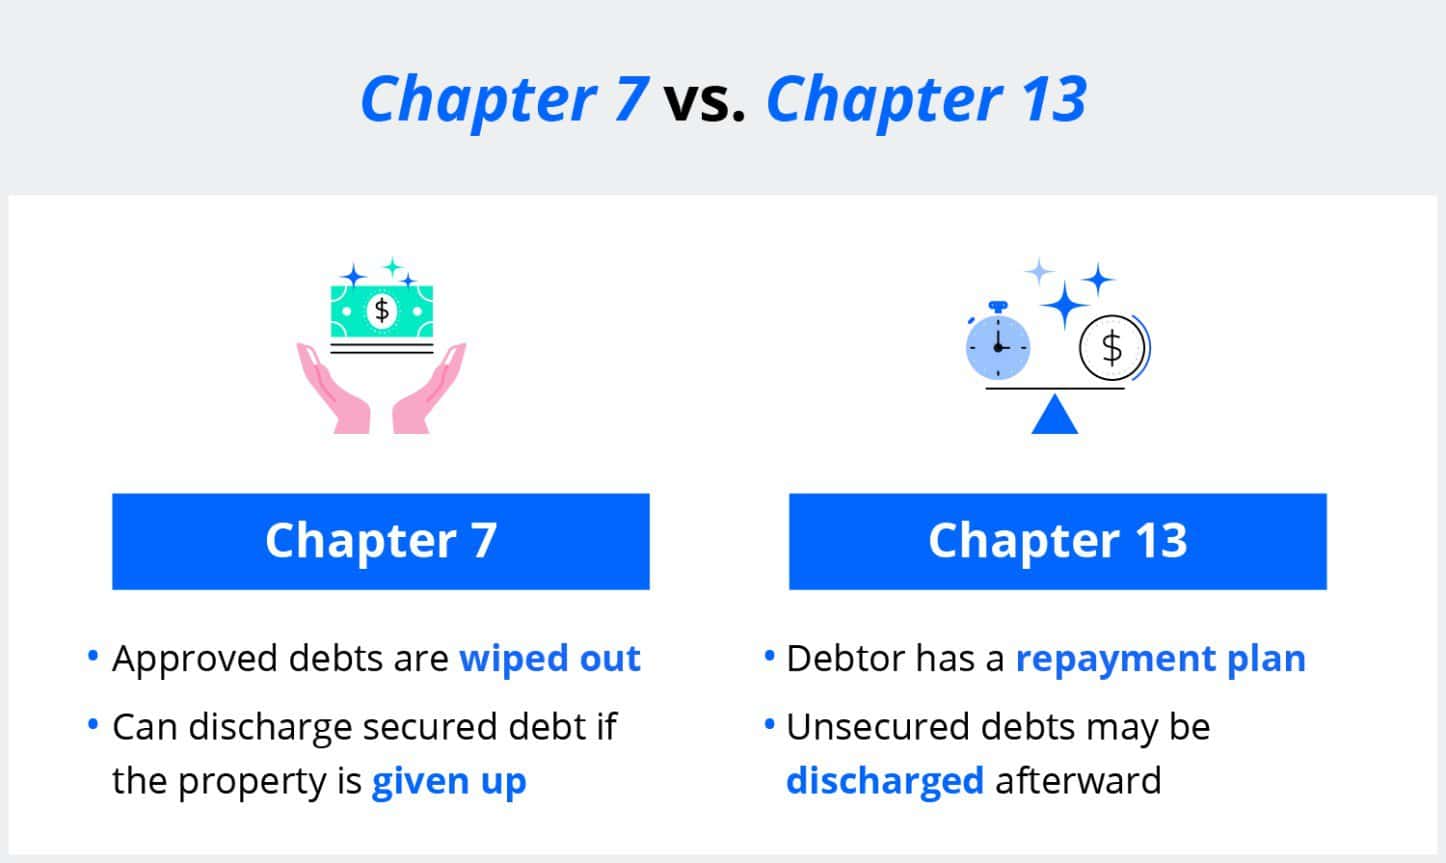 Chapter 7 vs. Chapter 13 bankruptcy